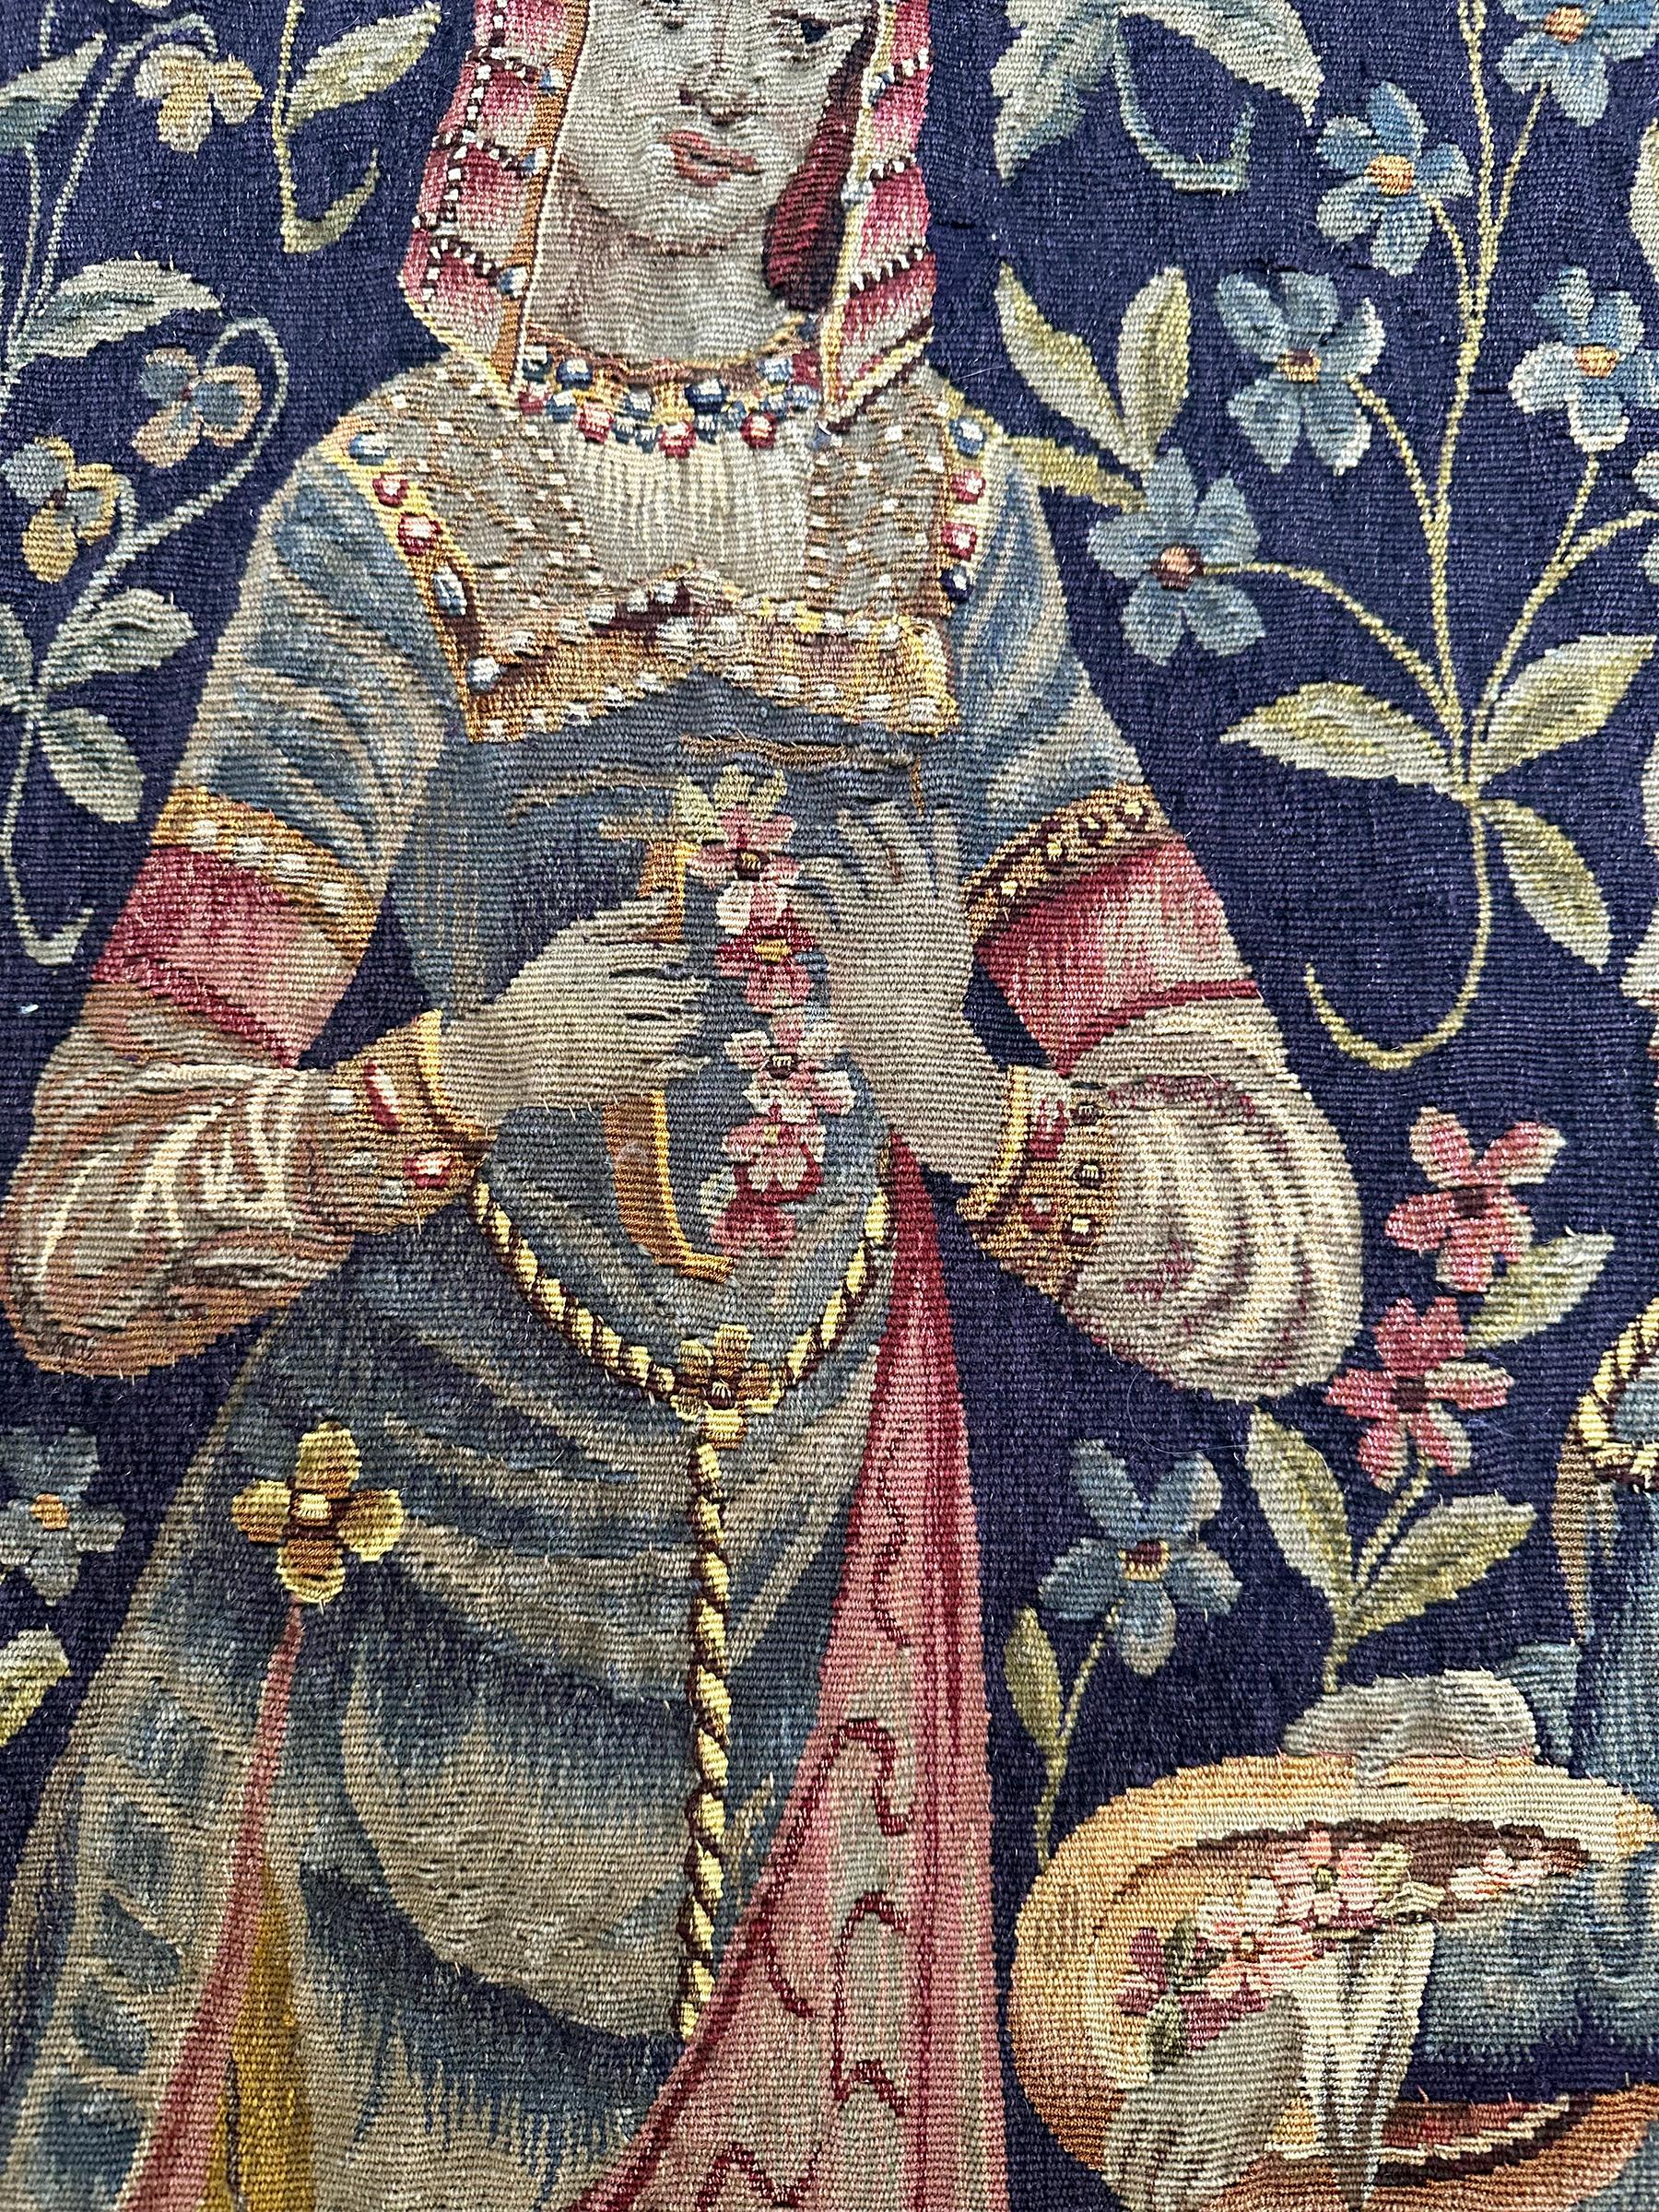 Hand-Woven Antique French Aubusson Tapestry Rare Wool & Silk Renaissance 4x5 1890 132x155cm For Sale